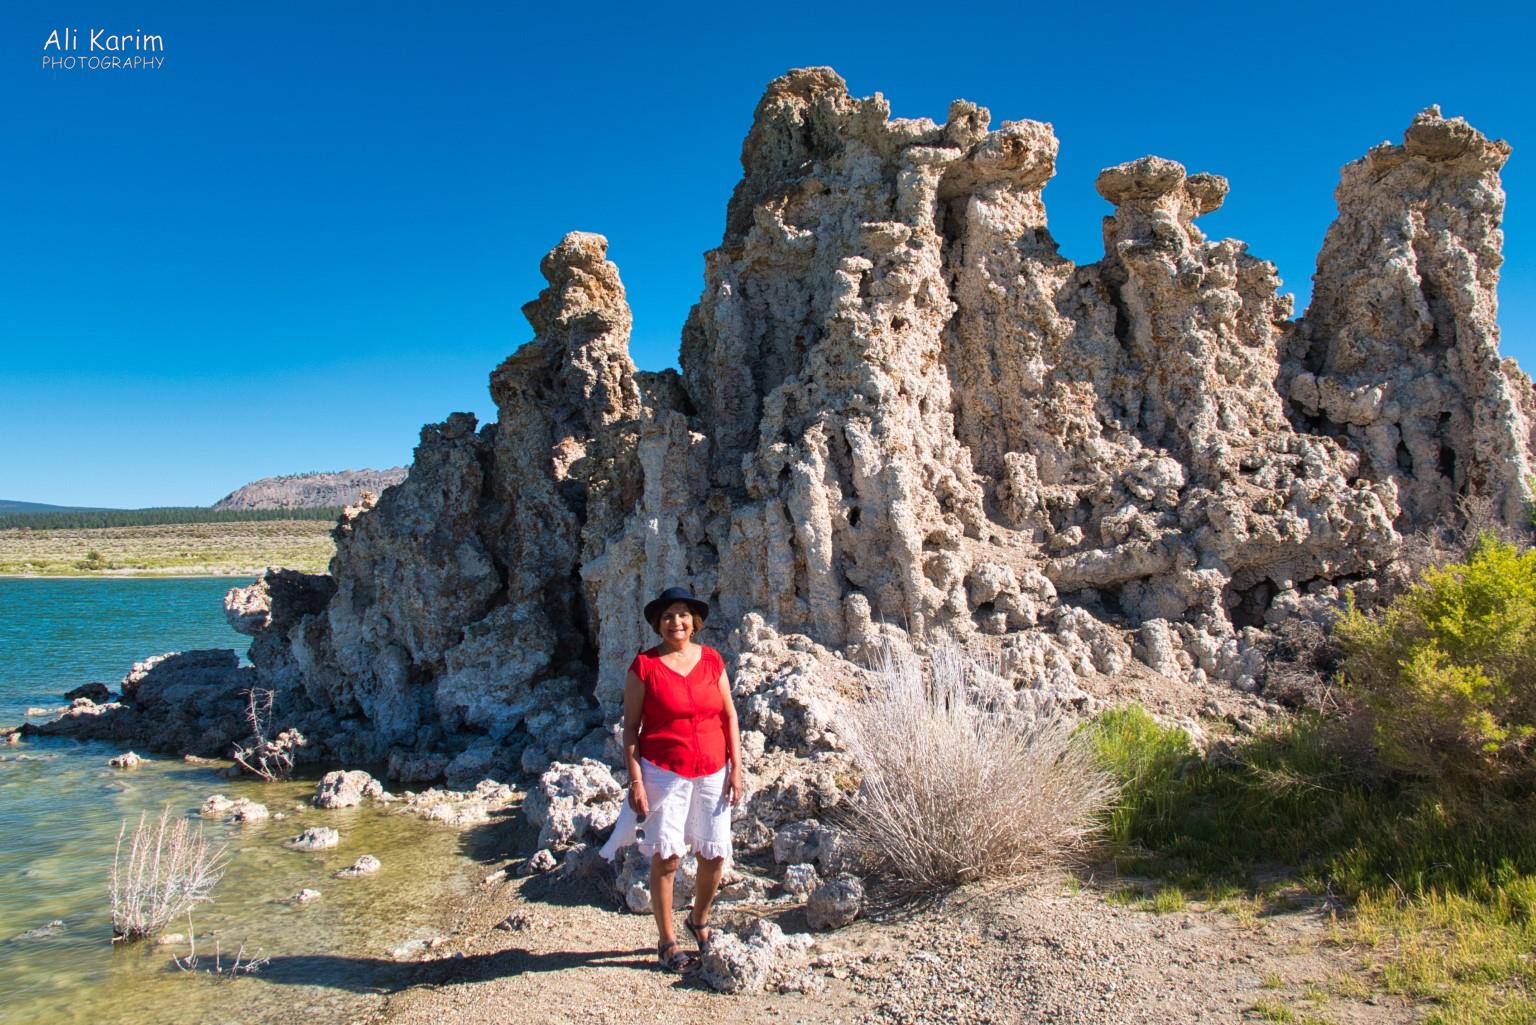 Yosemite to Death Valley, June 2020, Close up of tufa towers built up over hundreds of years at the edge of the lake